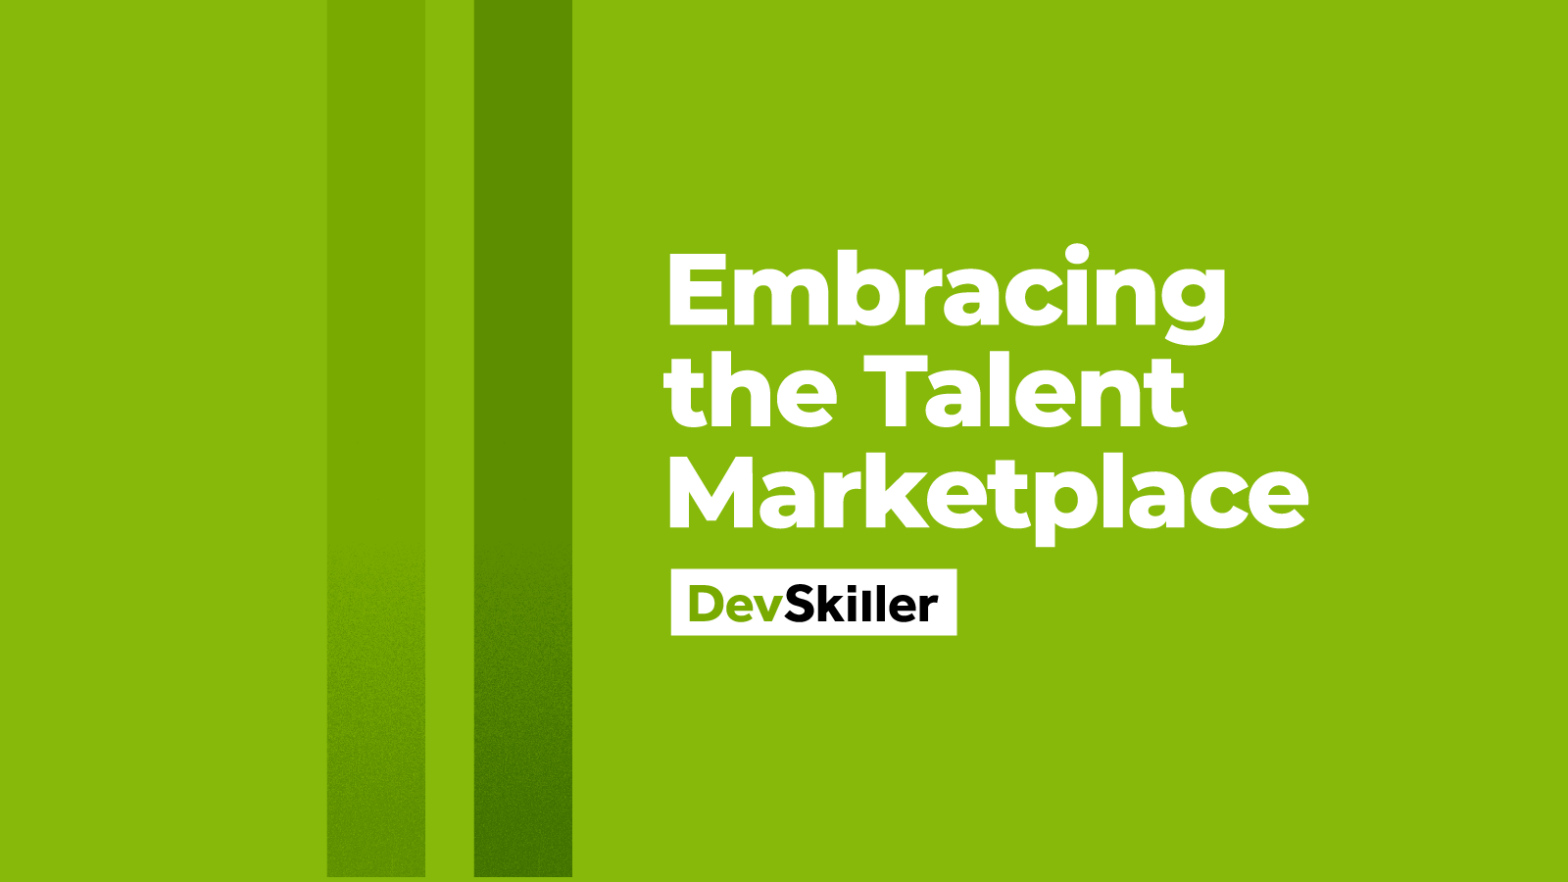 Embracing the Talent Marketplace